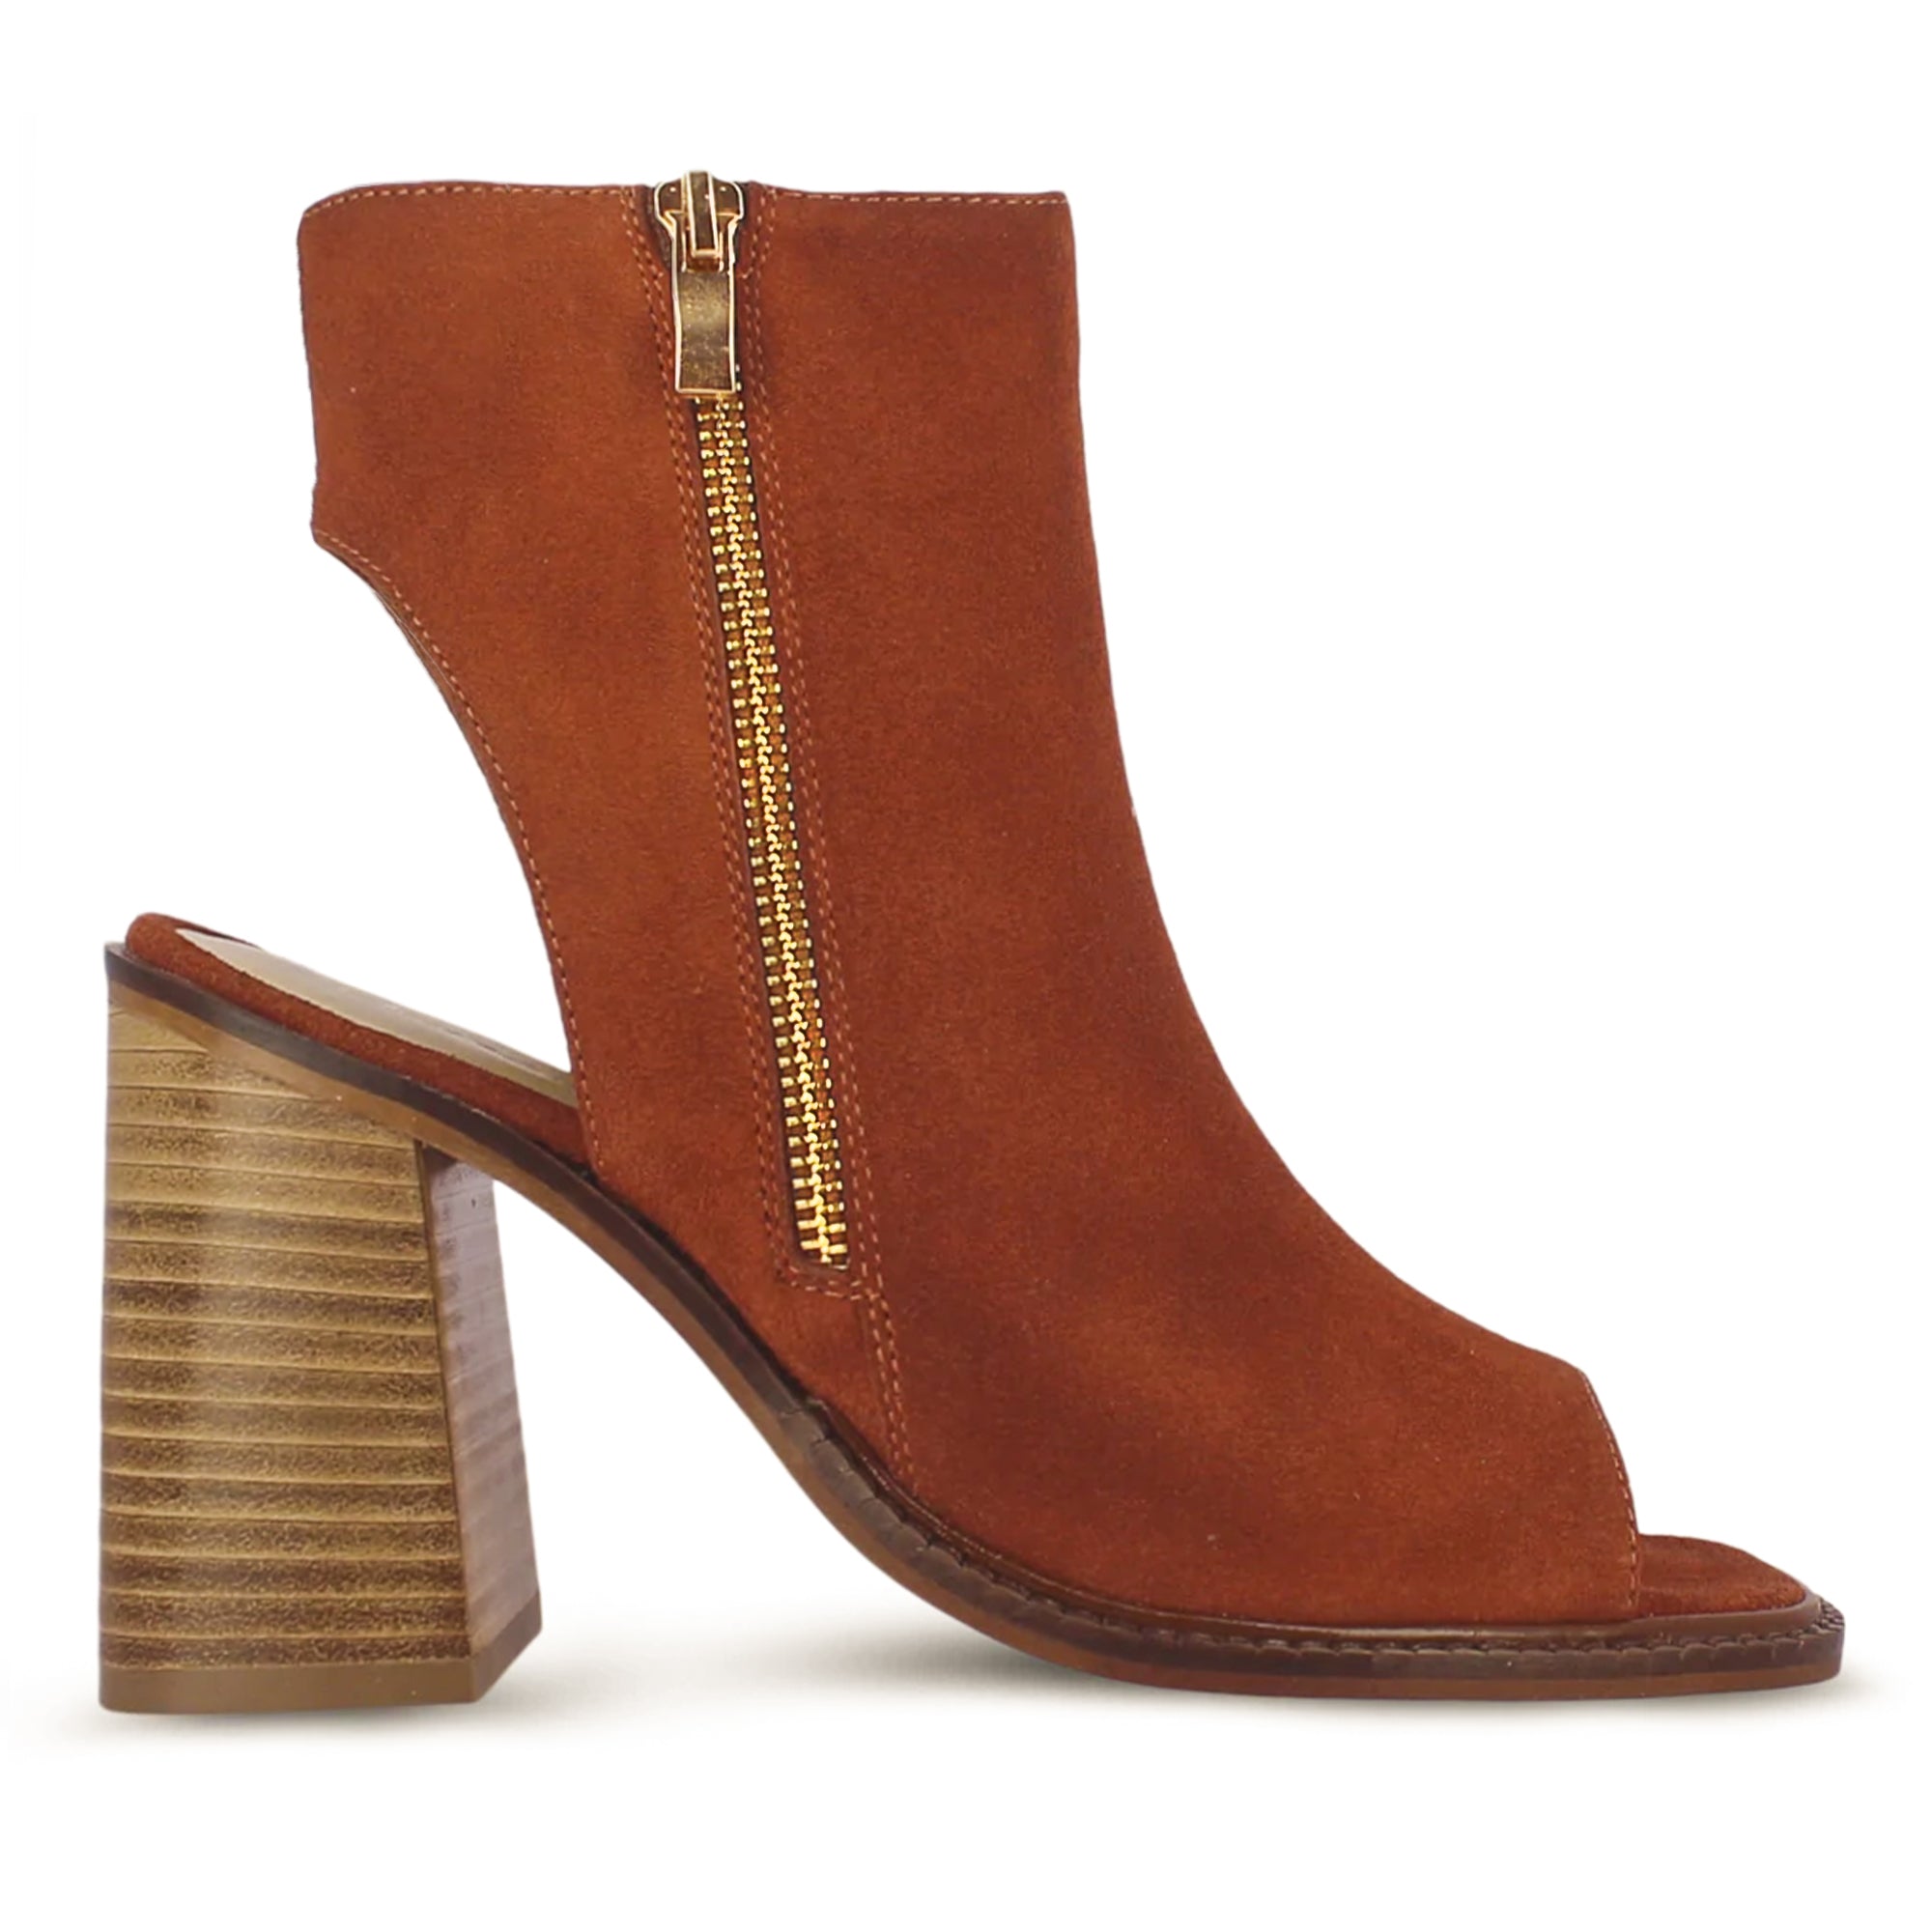 Saint Trudy Tan Suede Leather High Ankle Block Heels